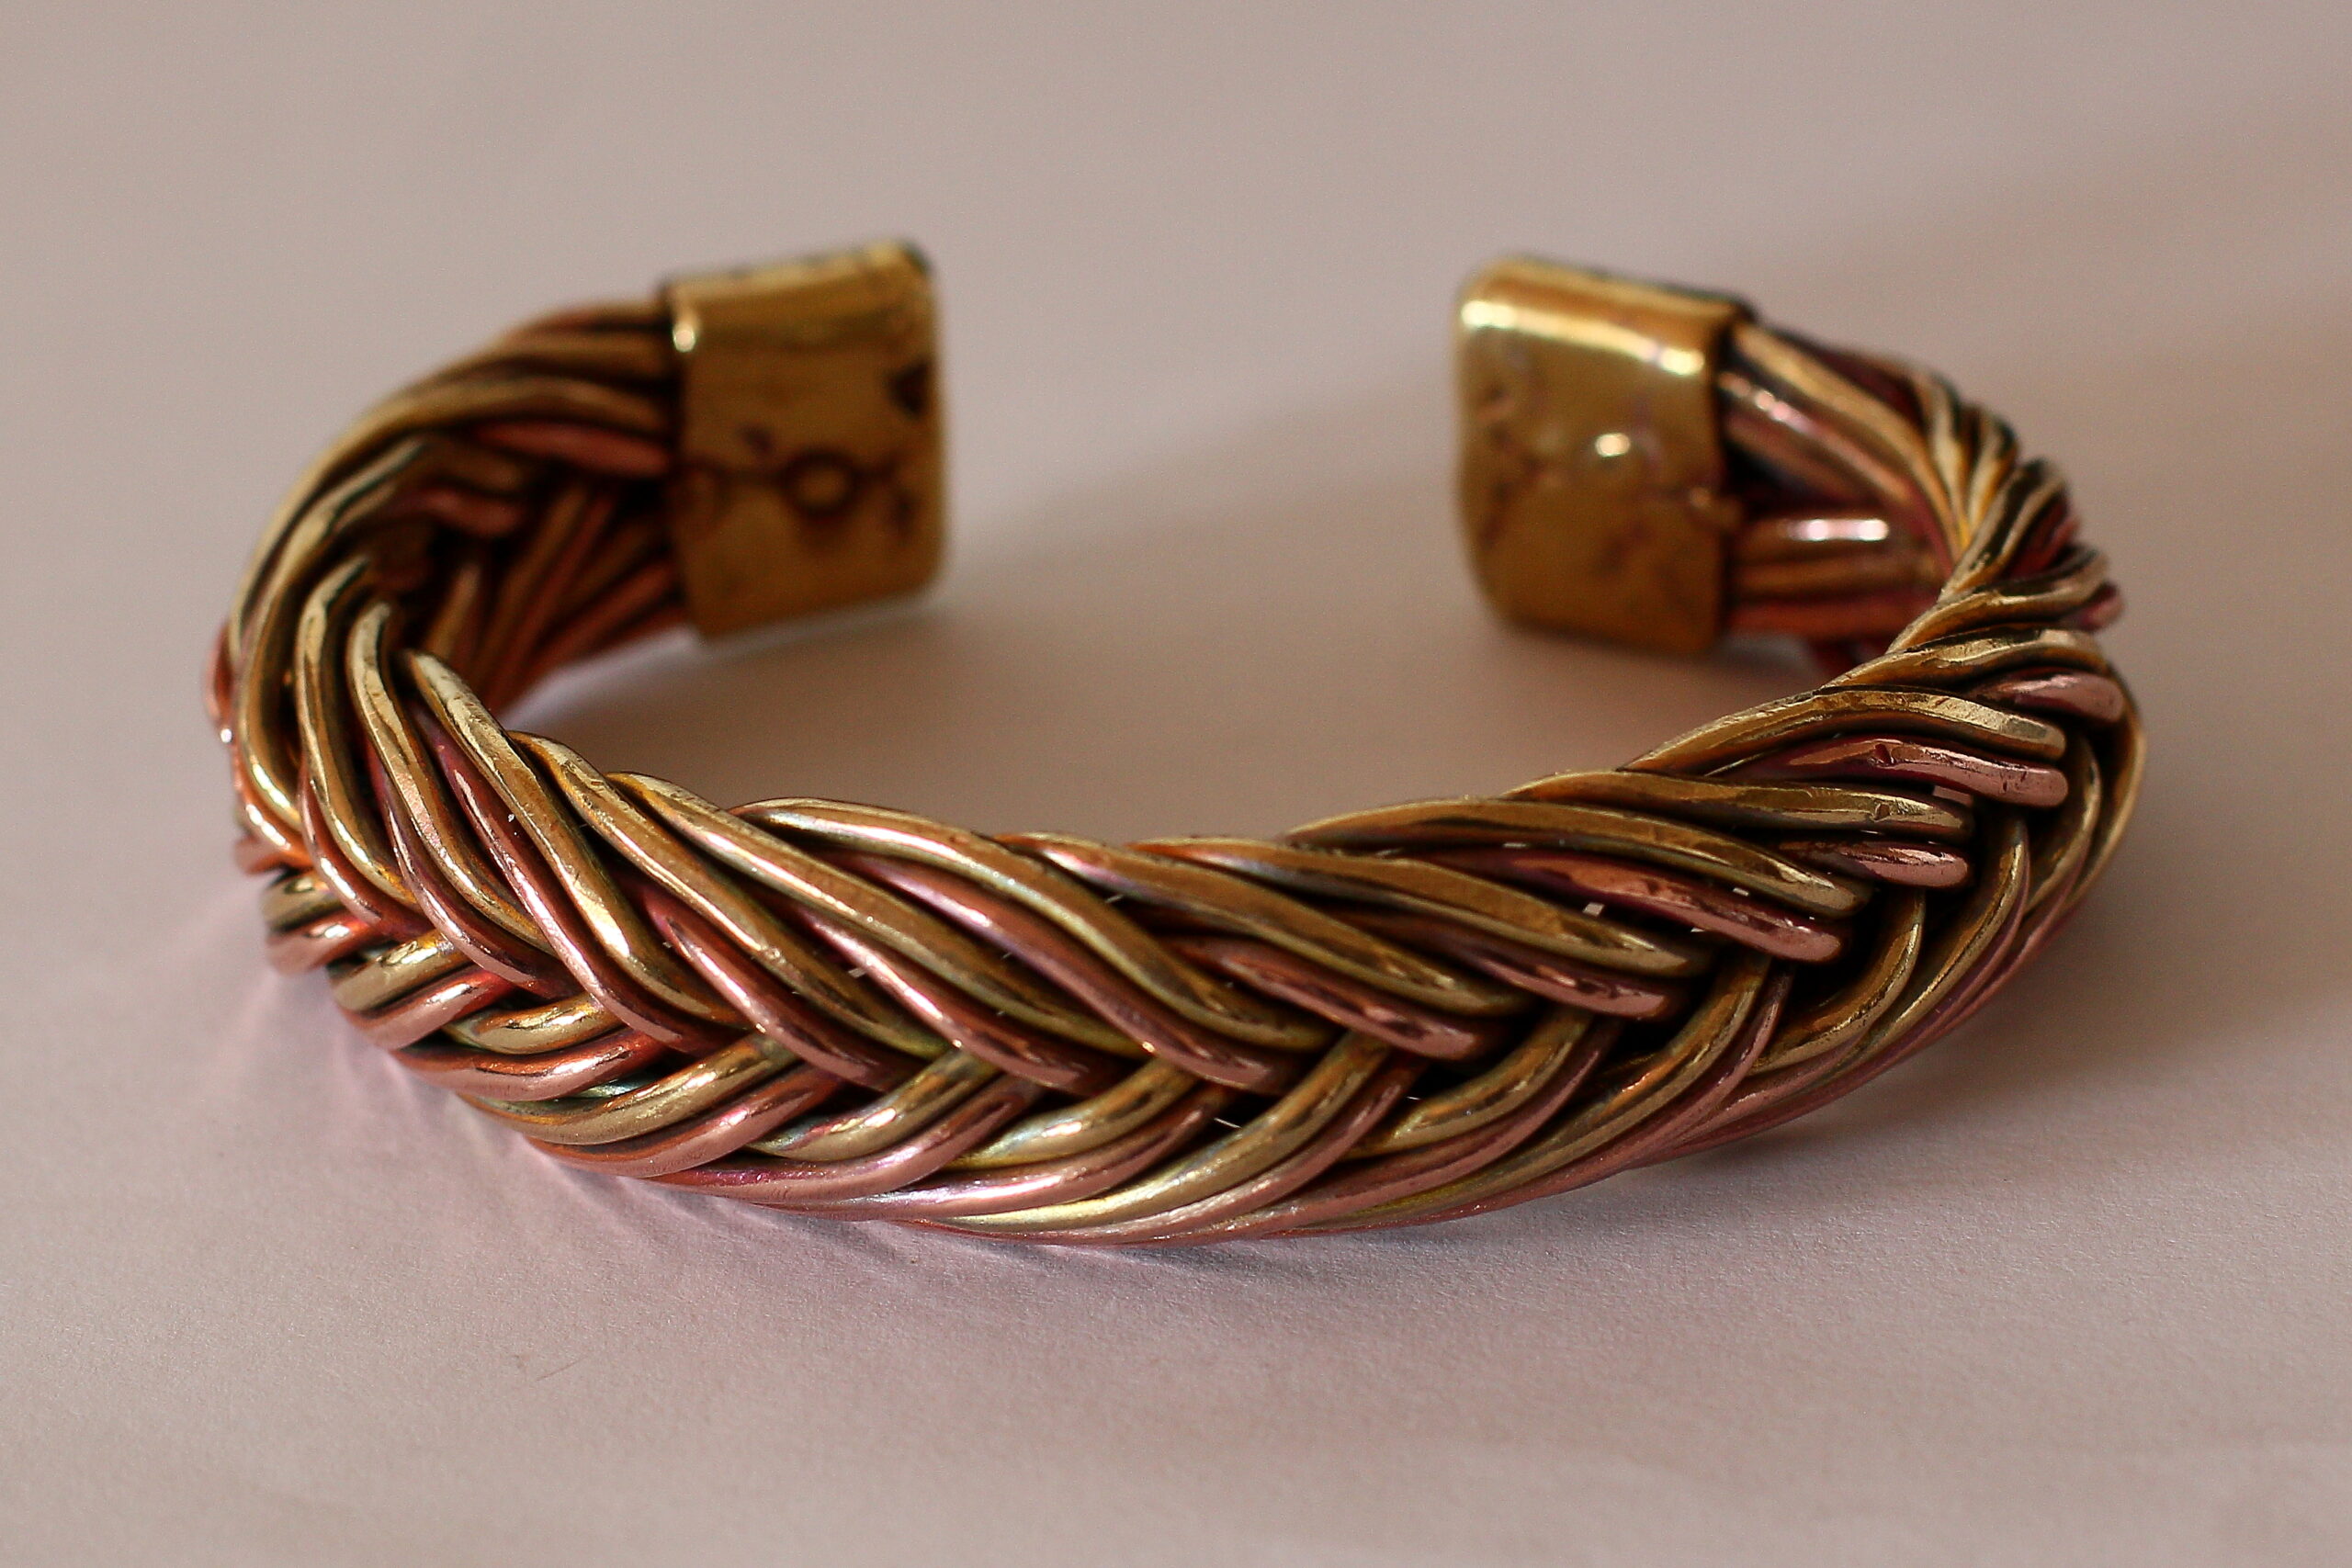 How To Clean Copper Jewellery